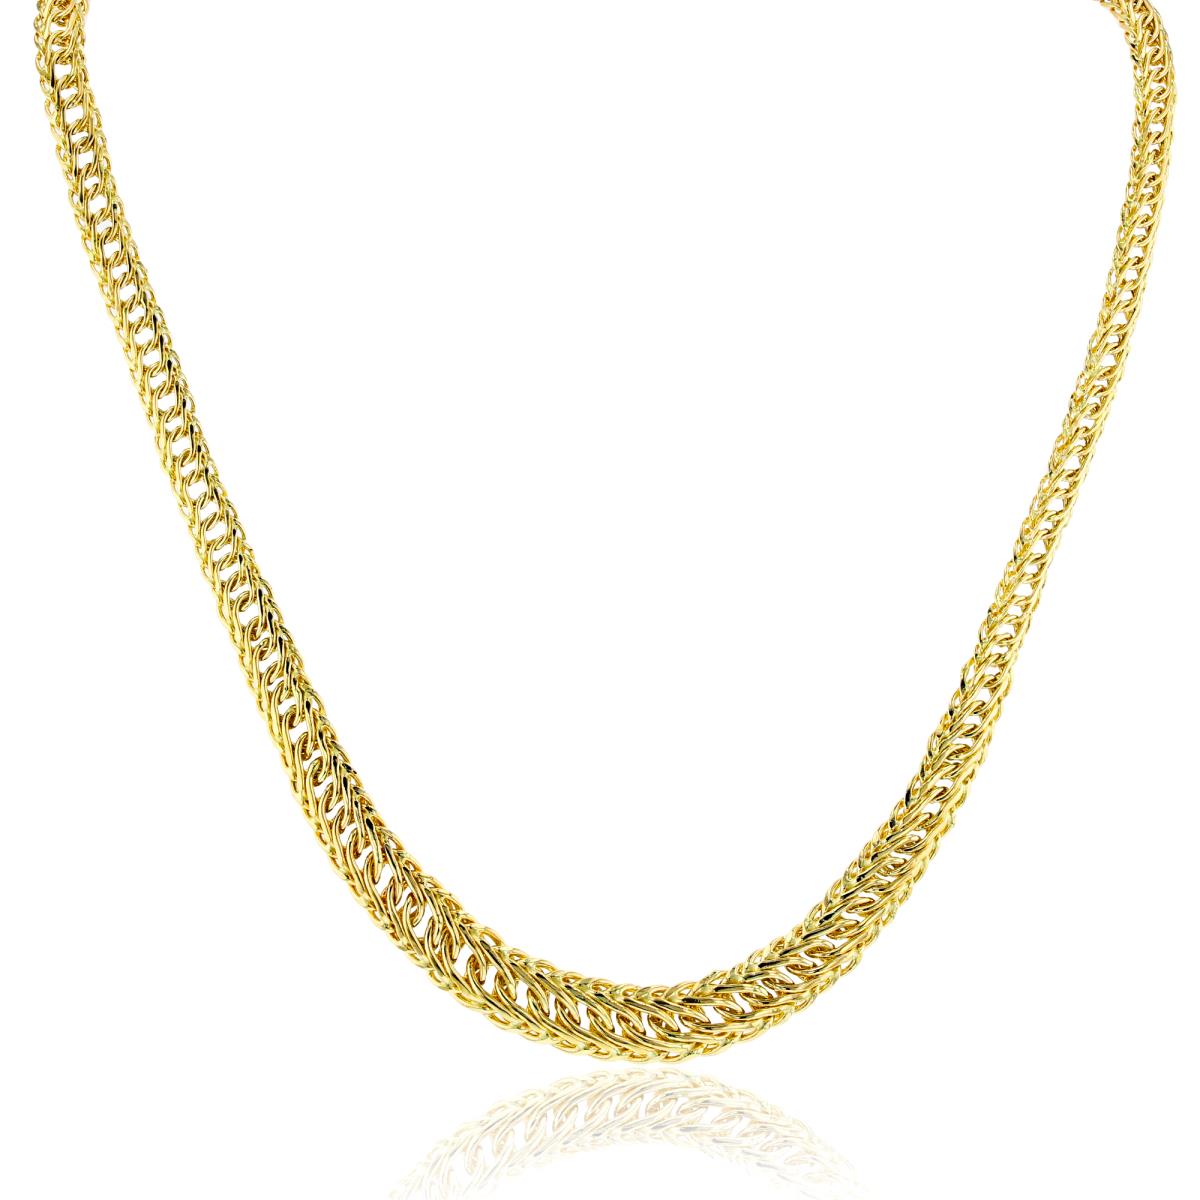 10K Yellow Gold Flexy Invert Linked 18"Necklace